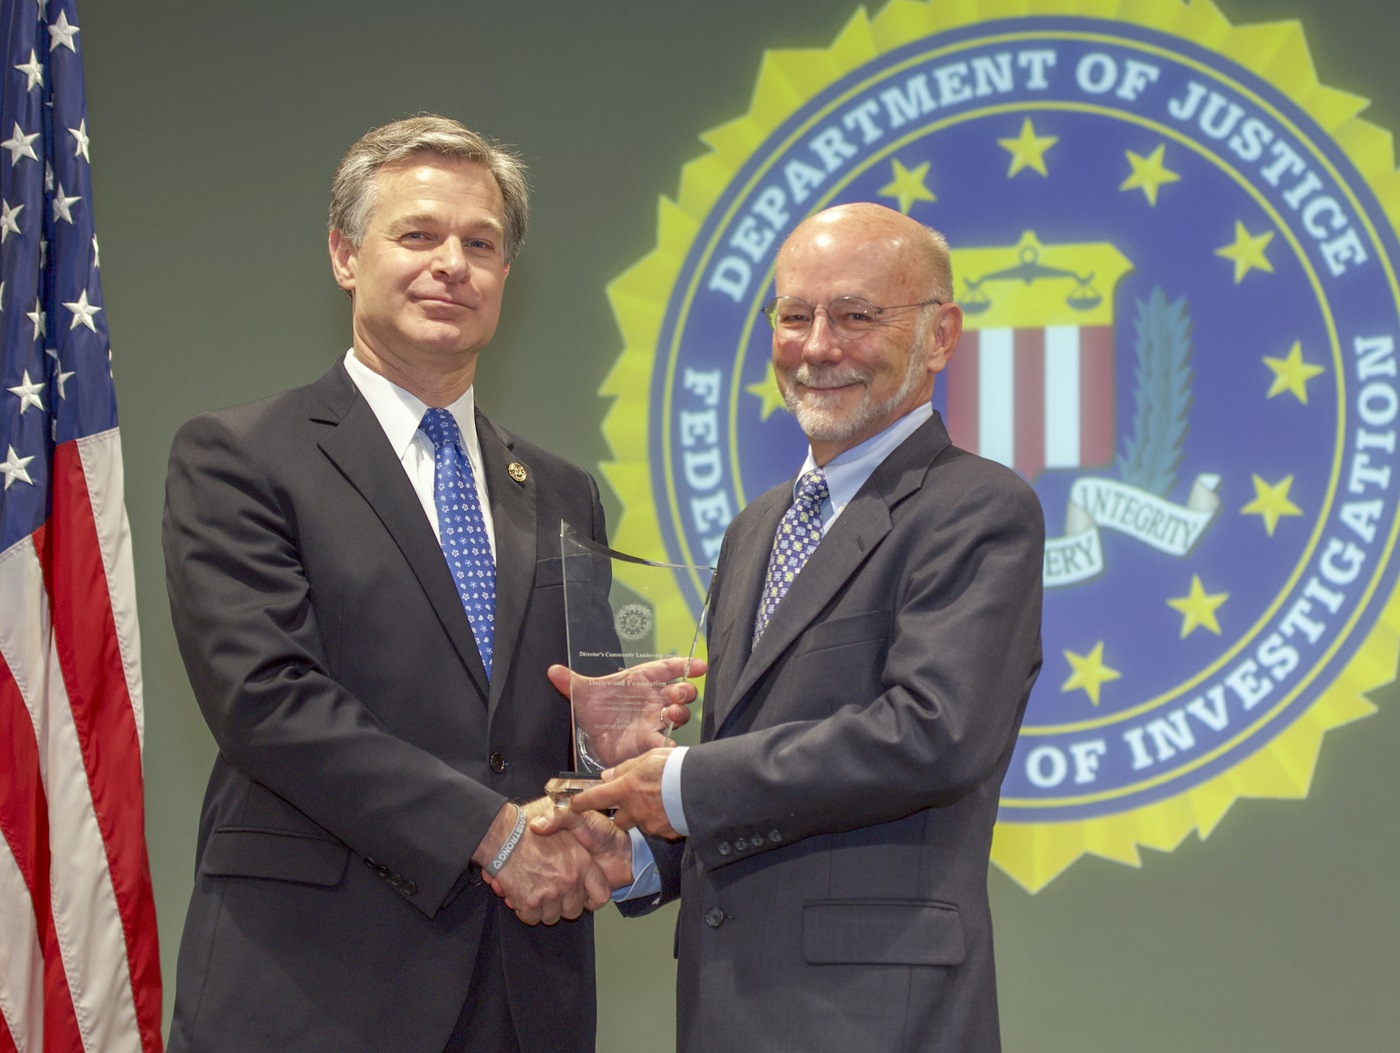 FBI Director Christopher Wray presents Knoxville Division recipient the Dollywood Foundation (represented by David Dotson) with the Director’s Community Leadership Award (DCLA) at a ceremony at FBI Headquarters on May 3, 2019.